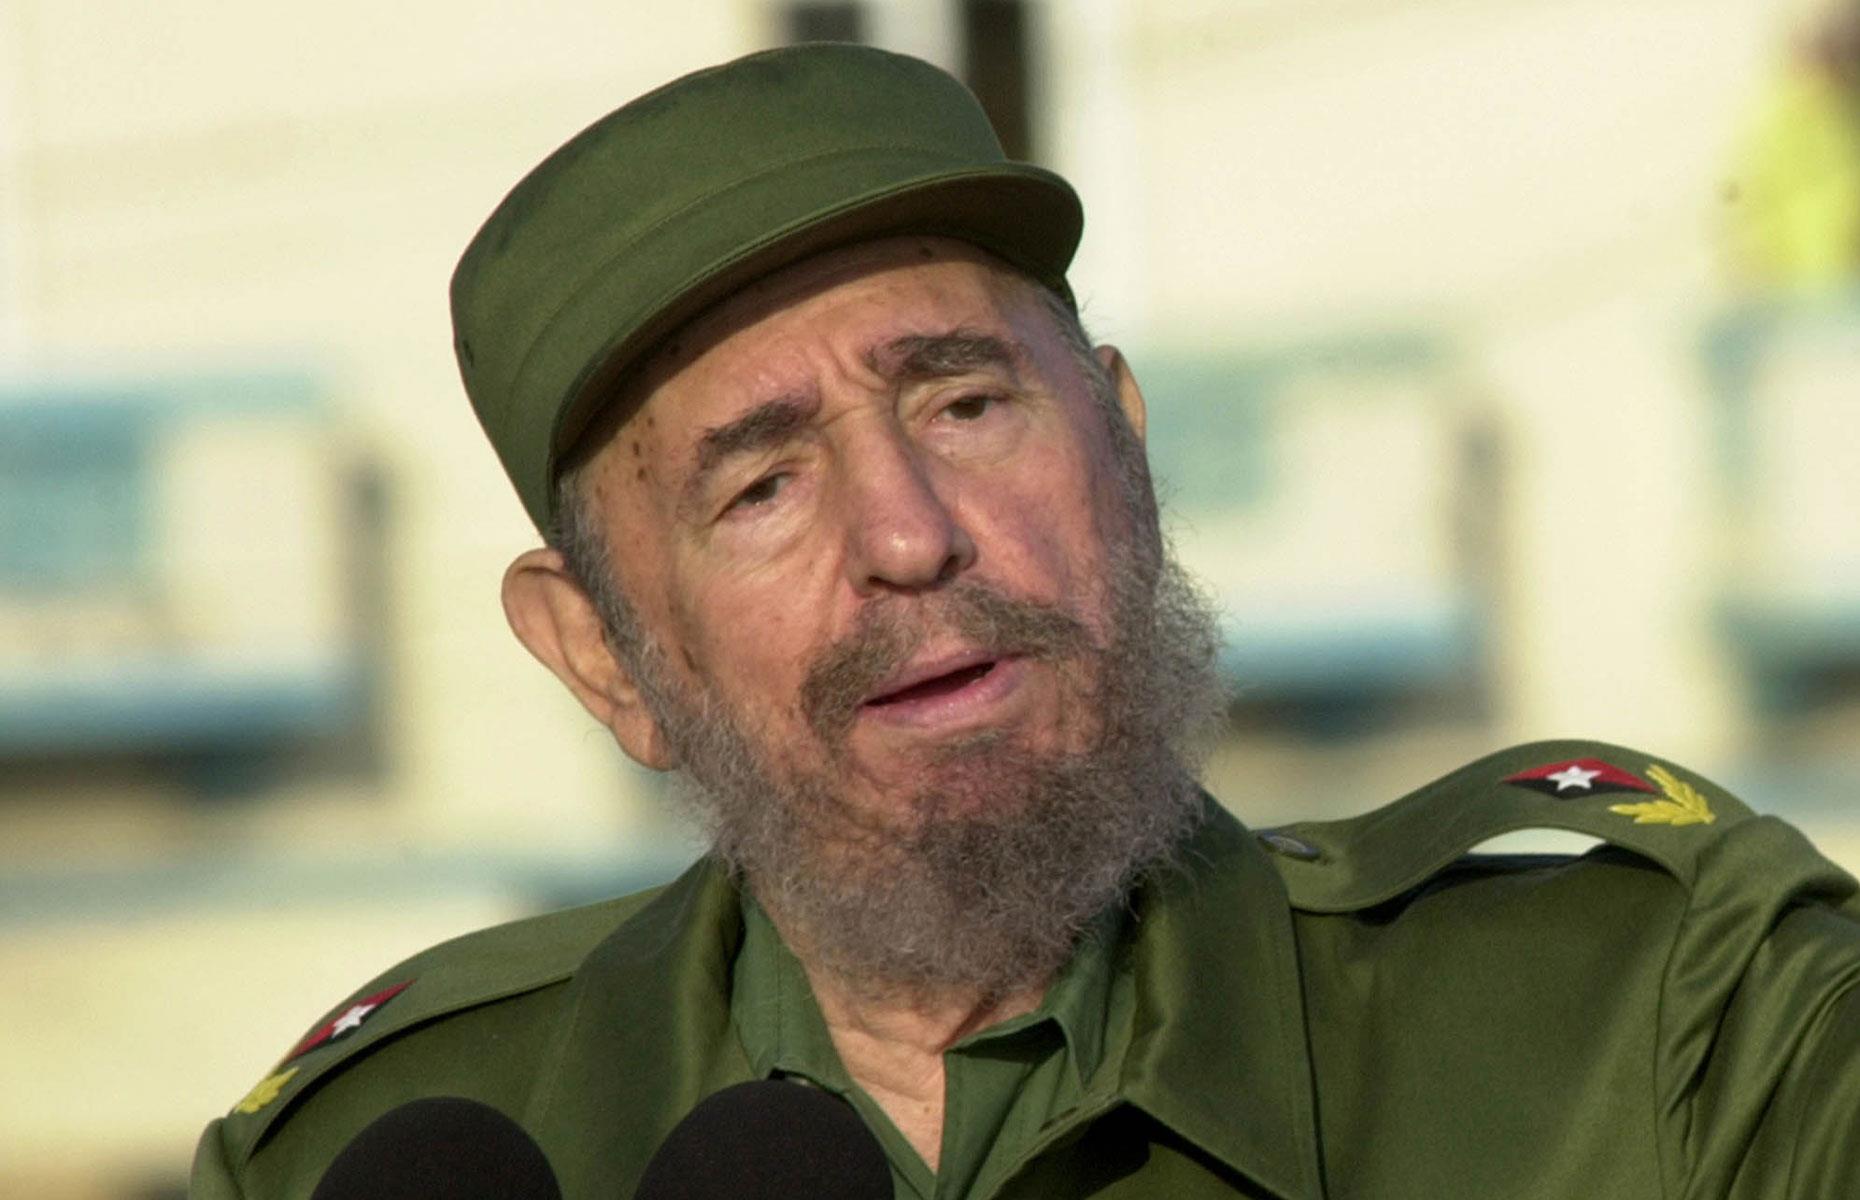 <p>Cuba's long-time leader, who was prime minister of the Caribbean country from 1959 to 1976 and president from 1976 to 2008, may have espoused Marxist-Leninist values based on fair distribution of wealth, but that didn't stop him apparently accruing an immense personal fortune. In 2006, his net worth was estimated by <em>Forbes</em> at $900 million. When adjusted for inflation, that's $1.15 billion today.</p>